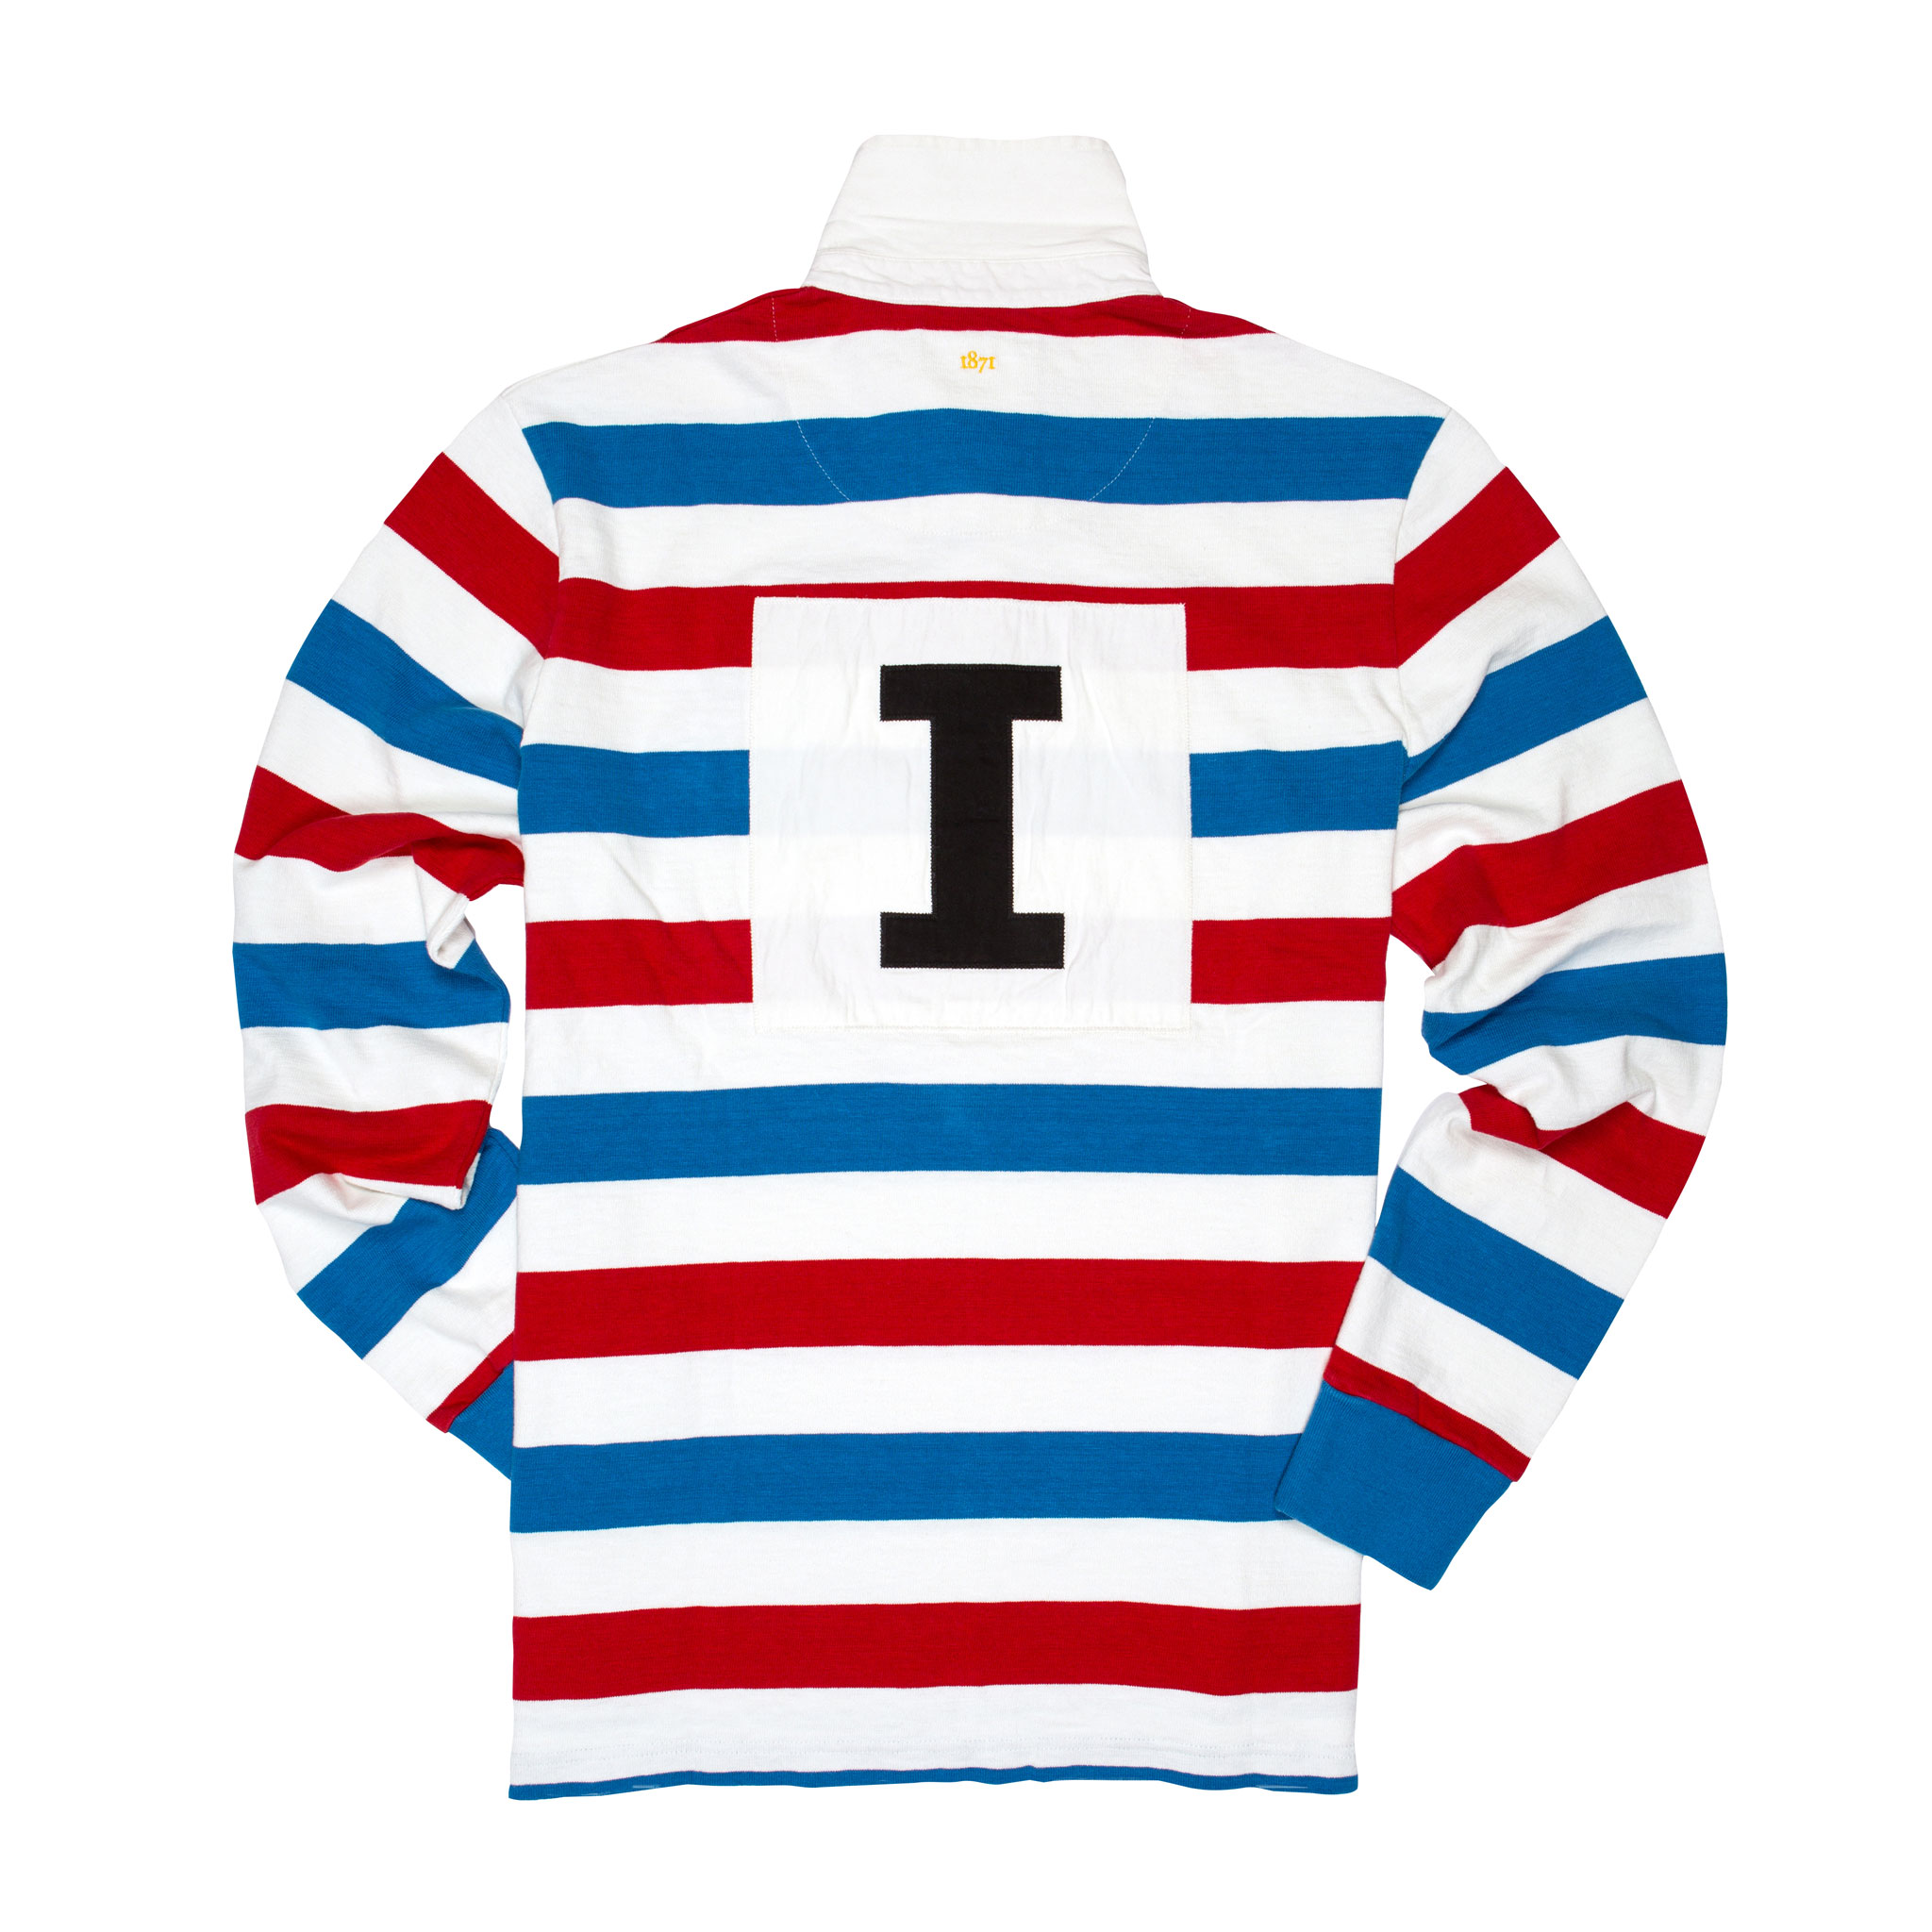 Lausanne 1871 Rugby Shirt - back